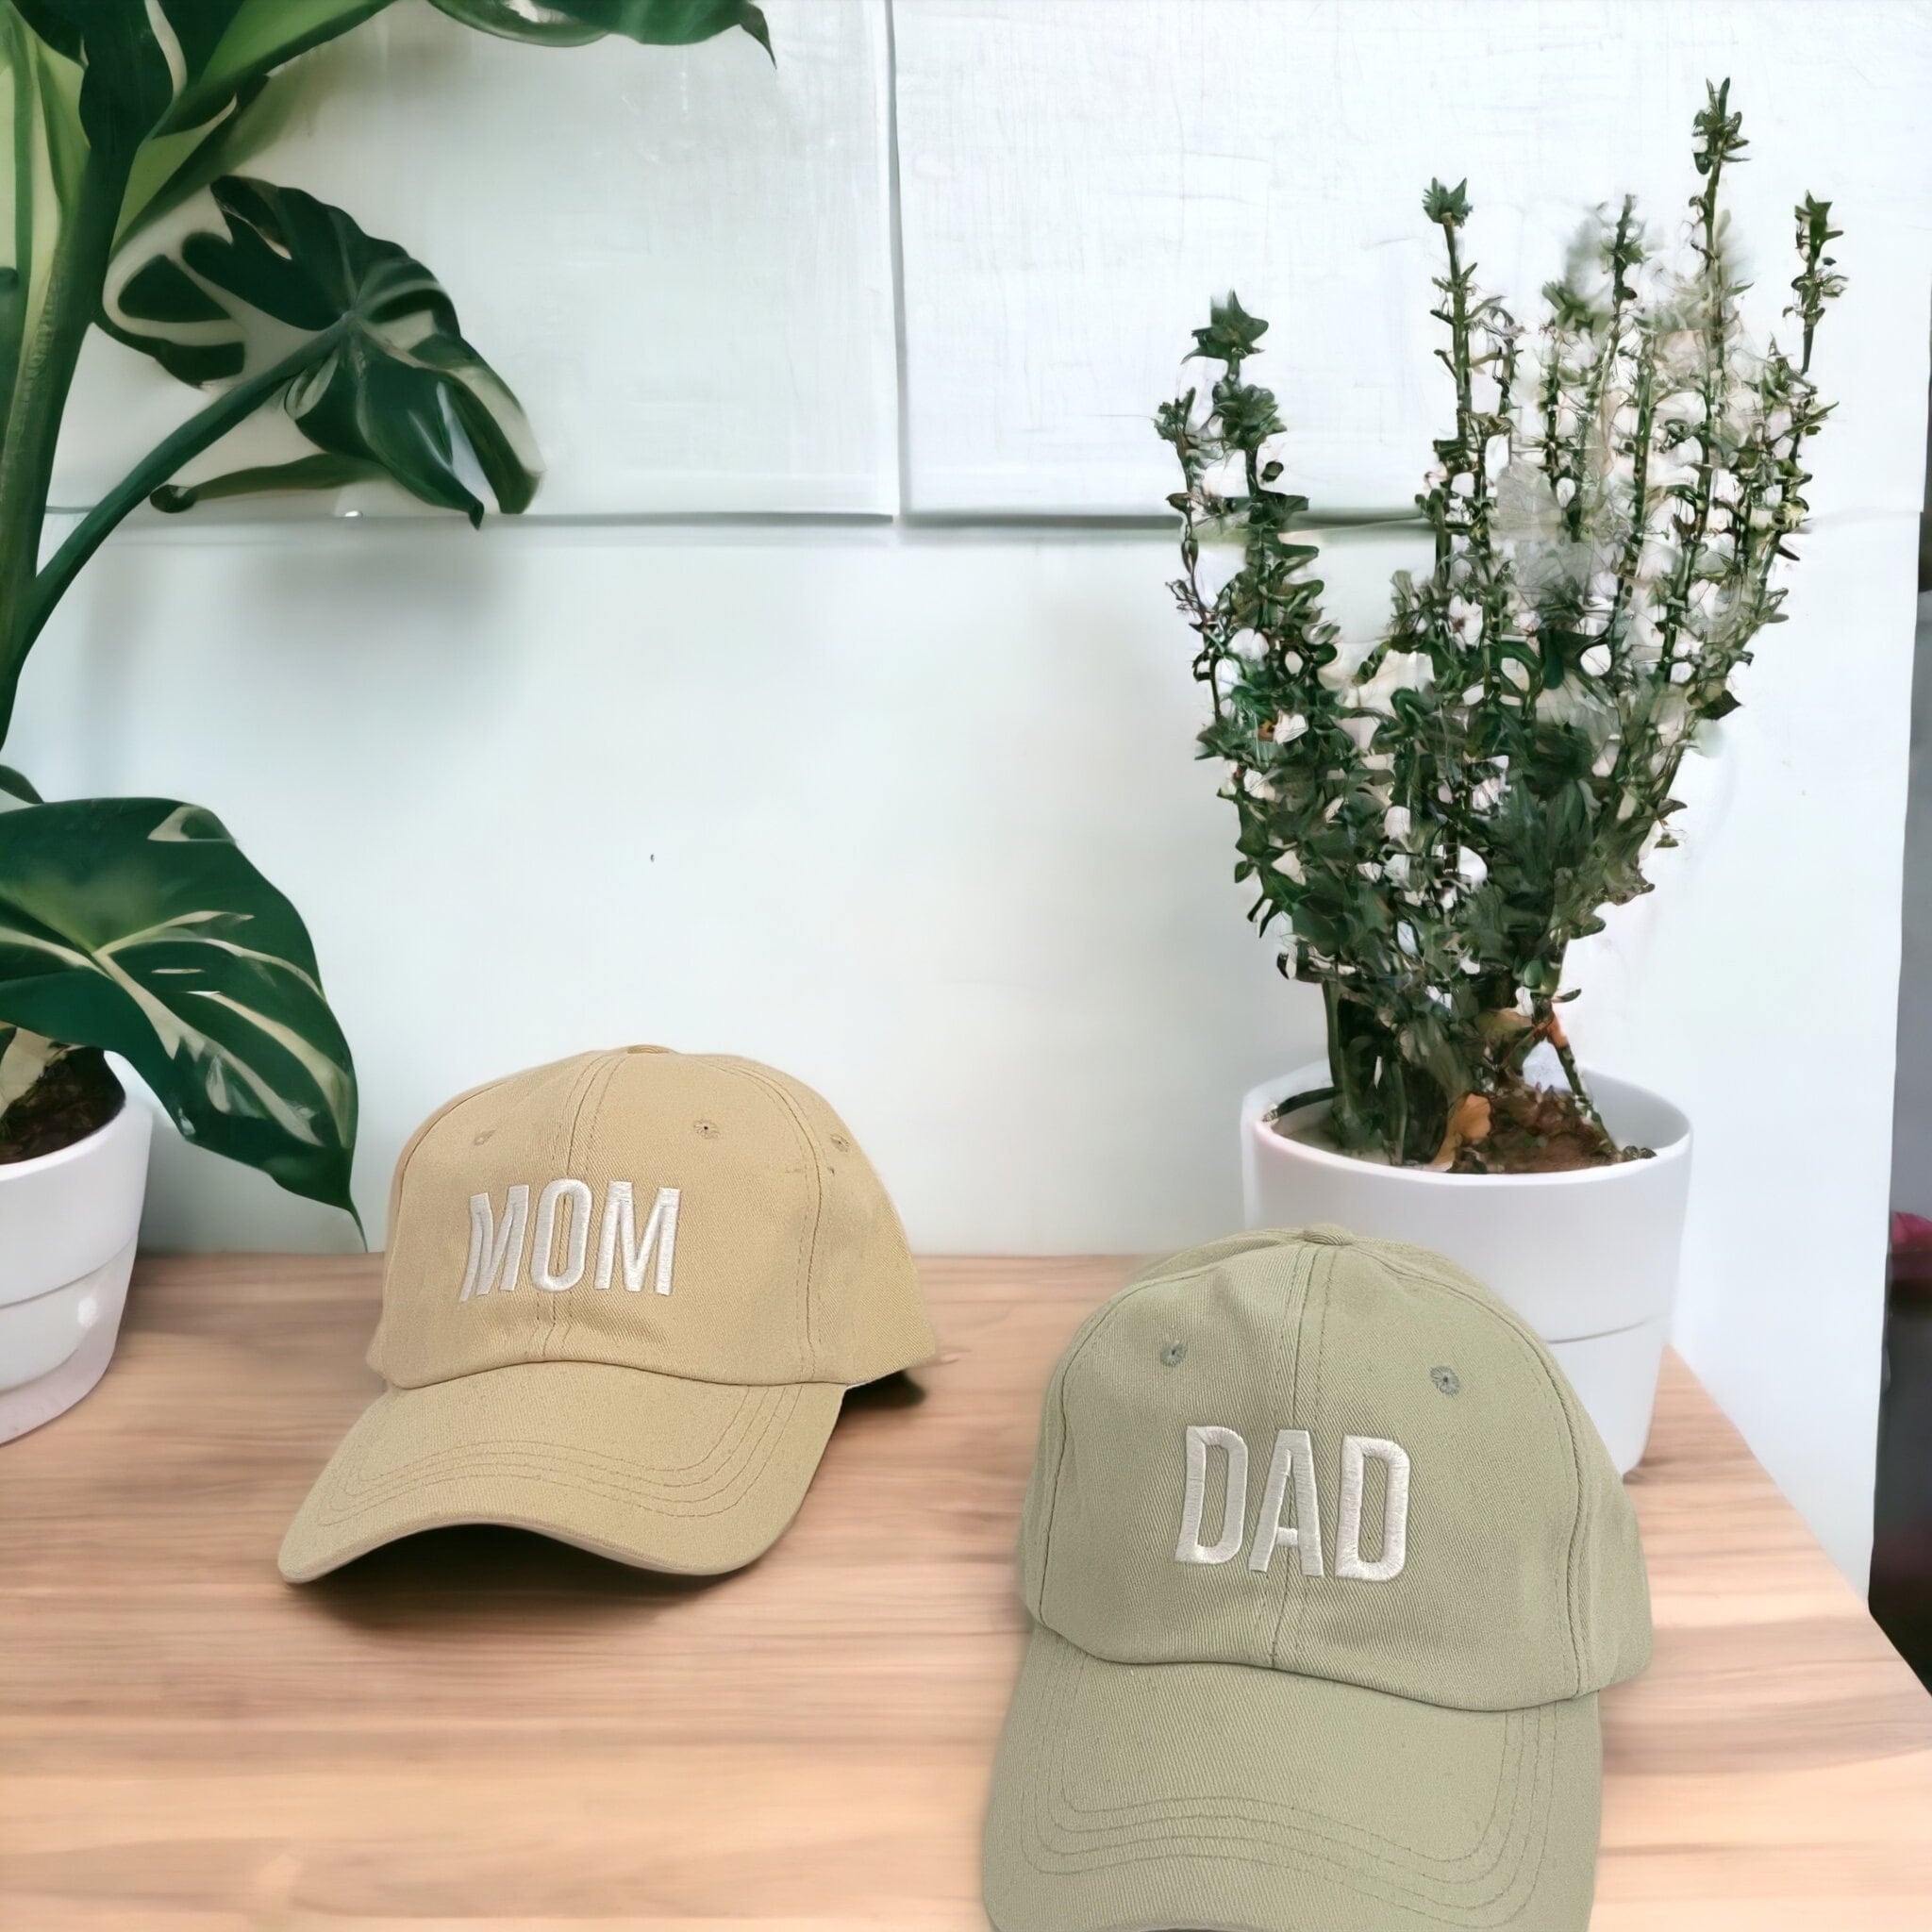 Mom and Dad Hats Fathers Day Mom Dad Gifts Hat Embroidered Adjustable  Baseball Caps Gift for Couples Parents